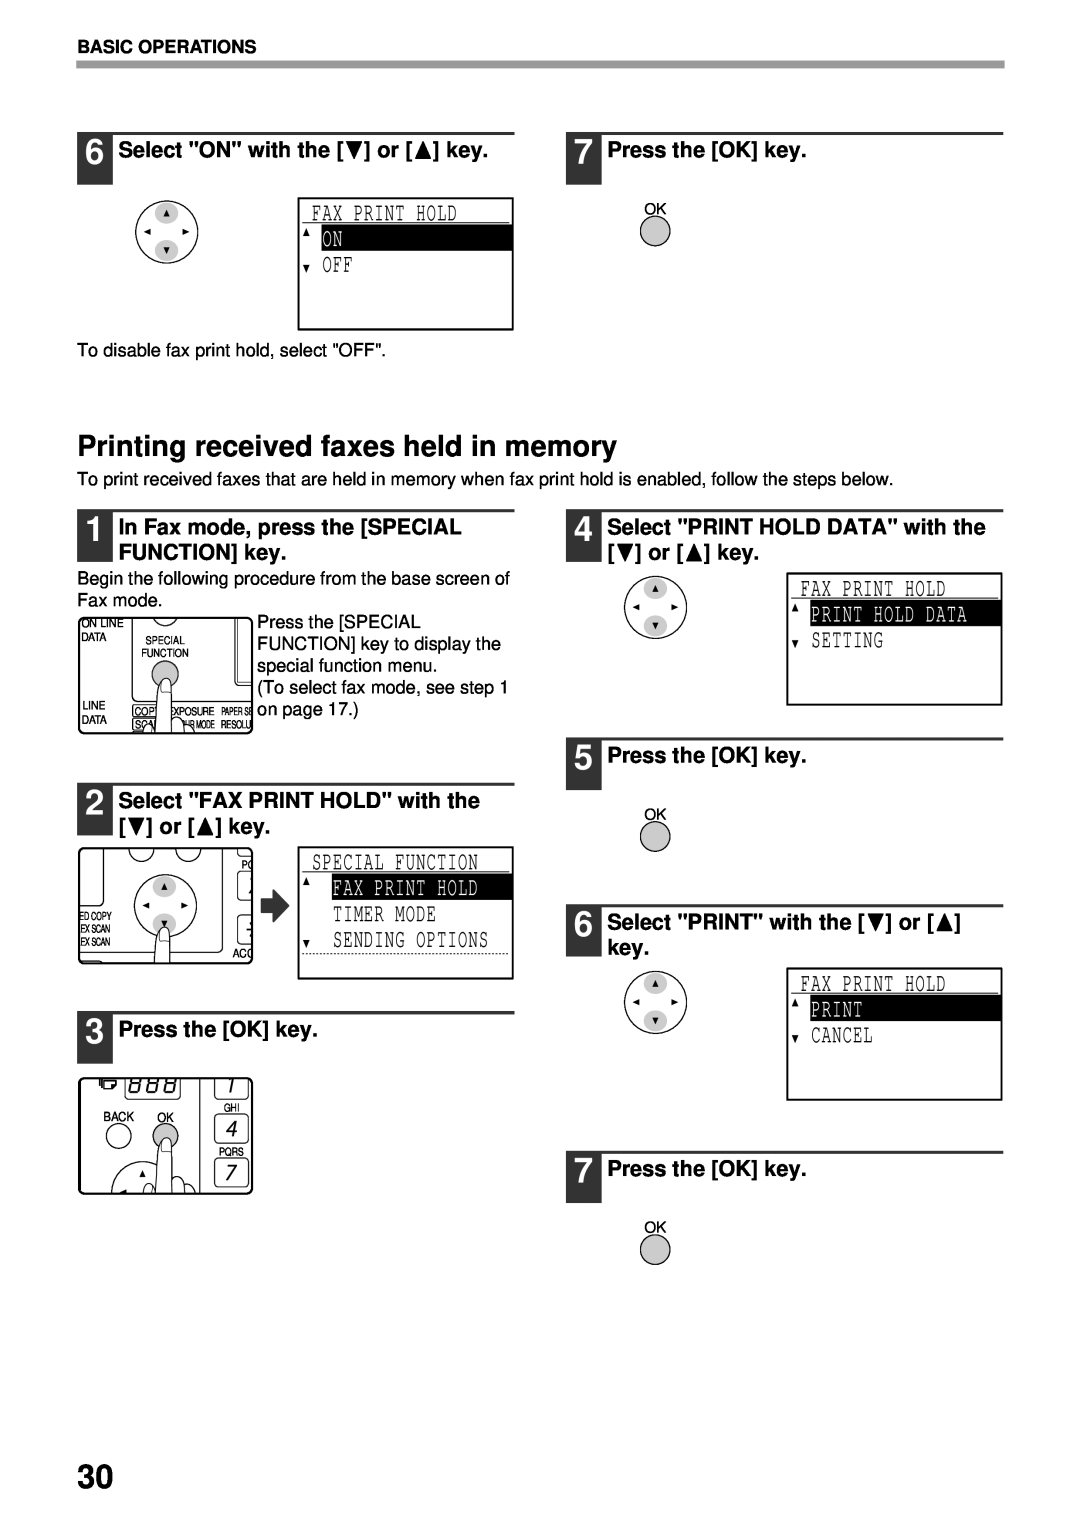 Sharp MX-FX13 appendix Printing received faxes held in memory, Print Hold Data, Select ON with the or key, Press the OK key 